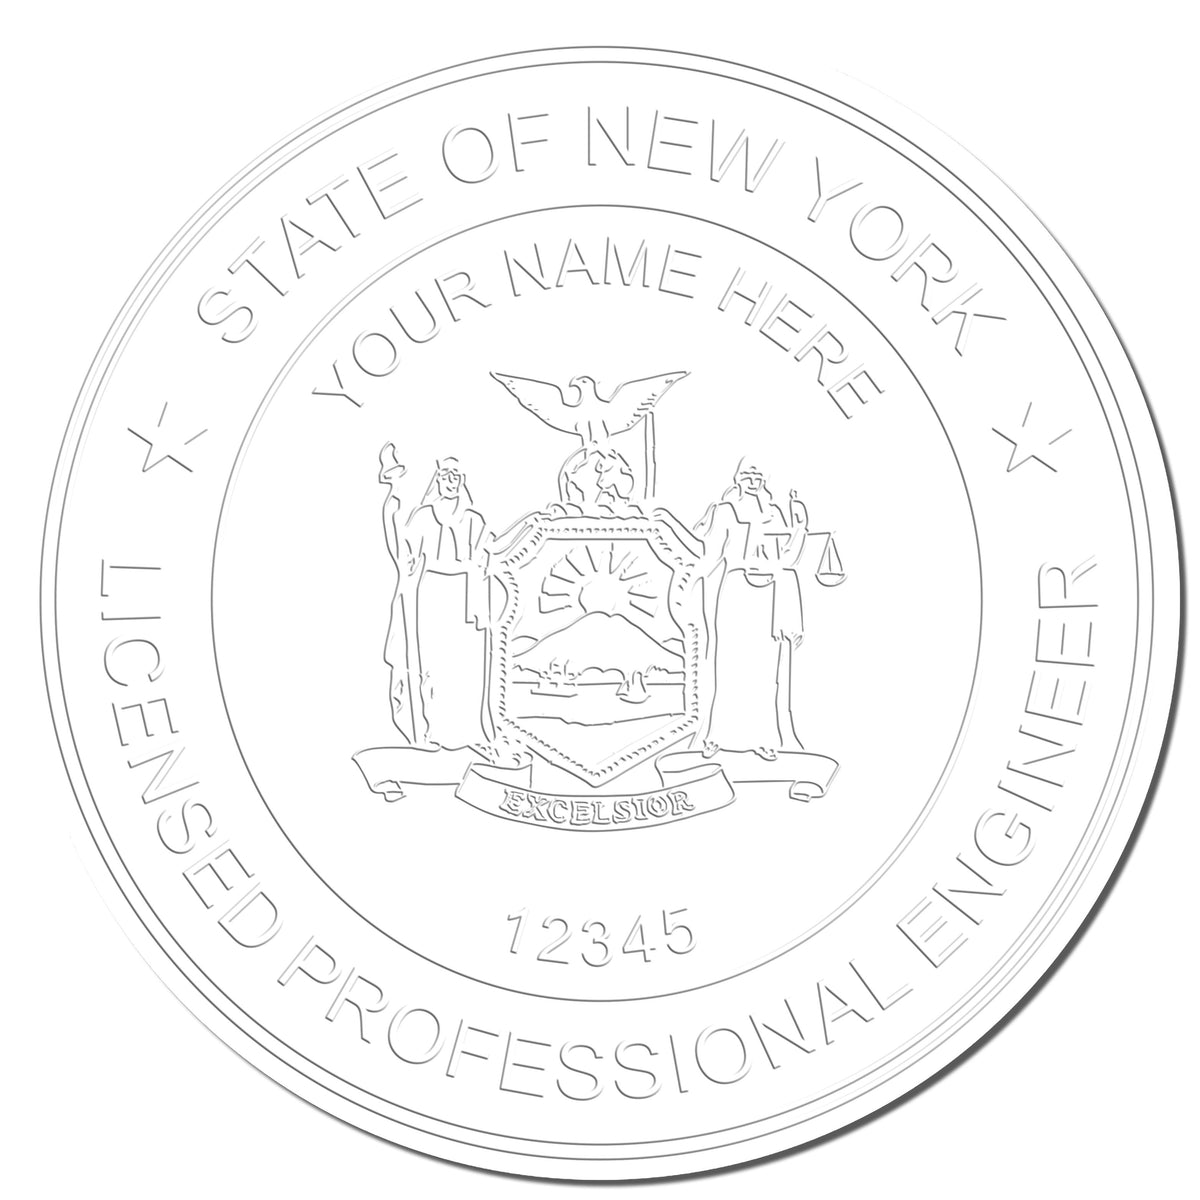 This paper is stamped with a sample imprint of the State of New York Extended Long Reach Engineer Seal, signifying its quality and reliability.